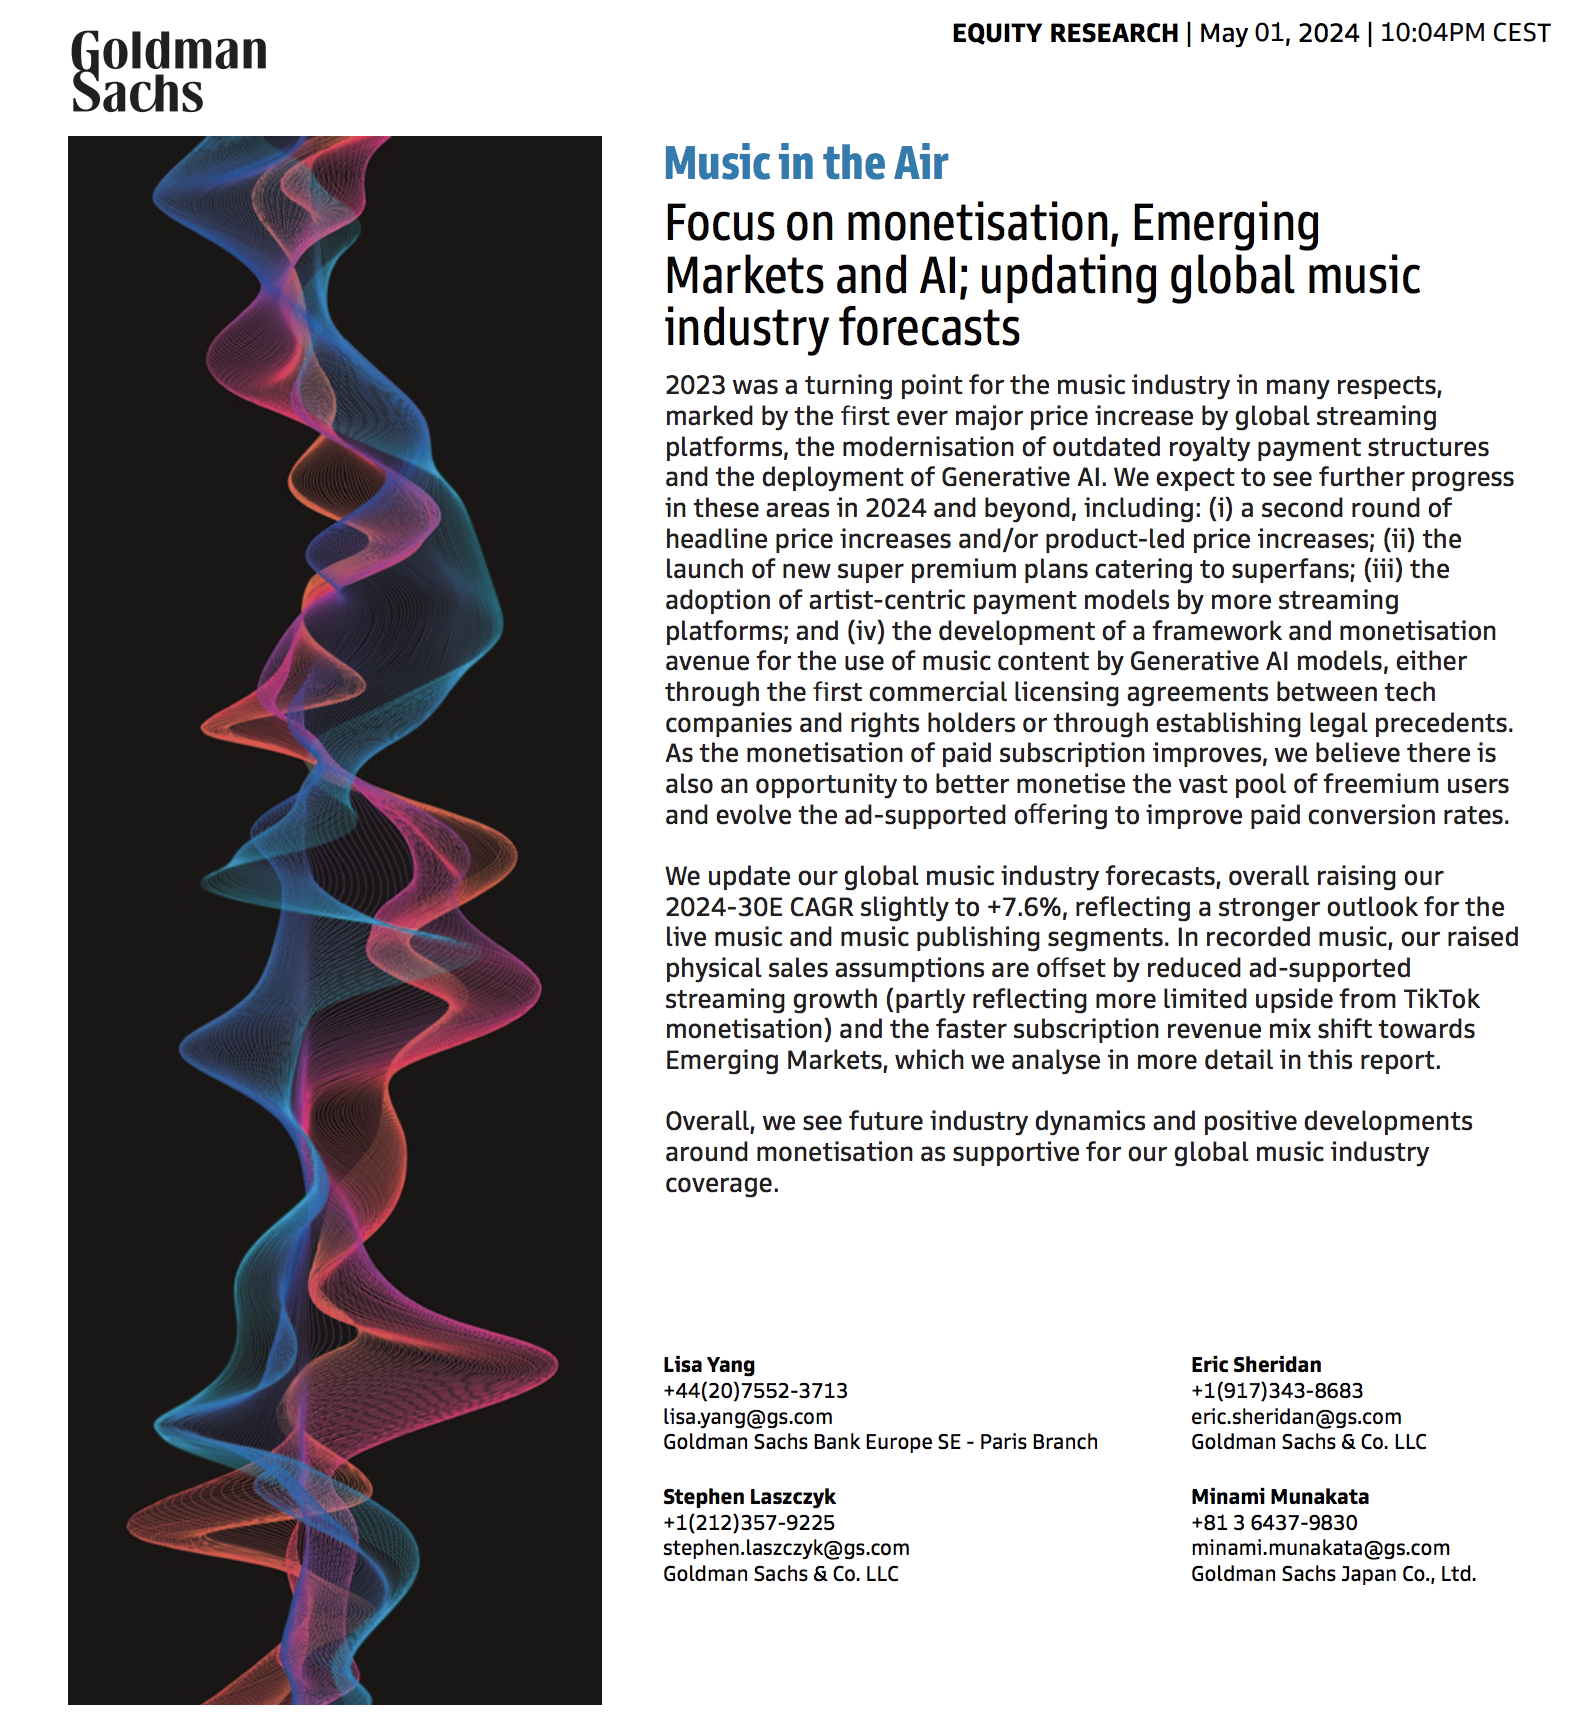 Music in the Air – Global Music Industry Trends & Emerging Markets